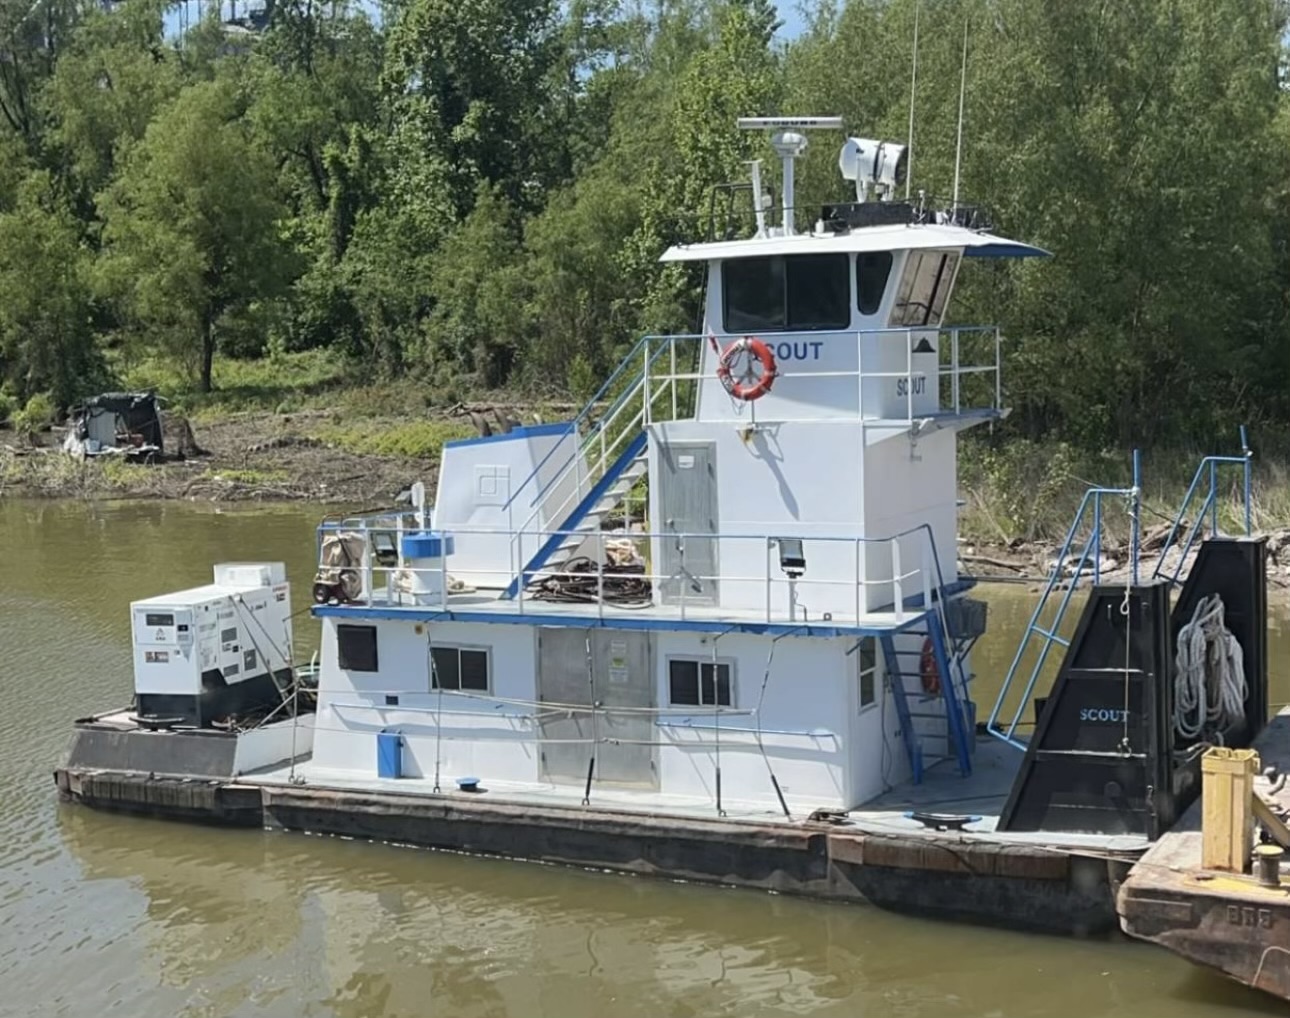 Photograph of the M/V Scout pushboat